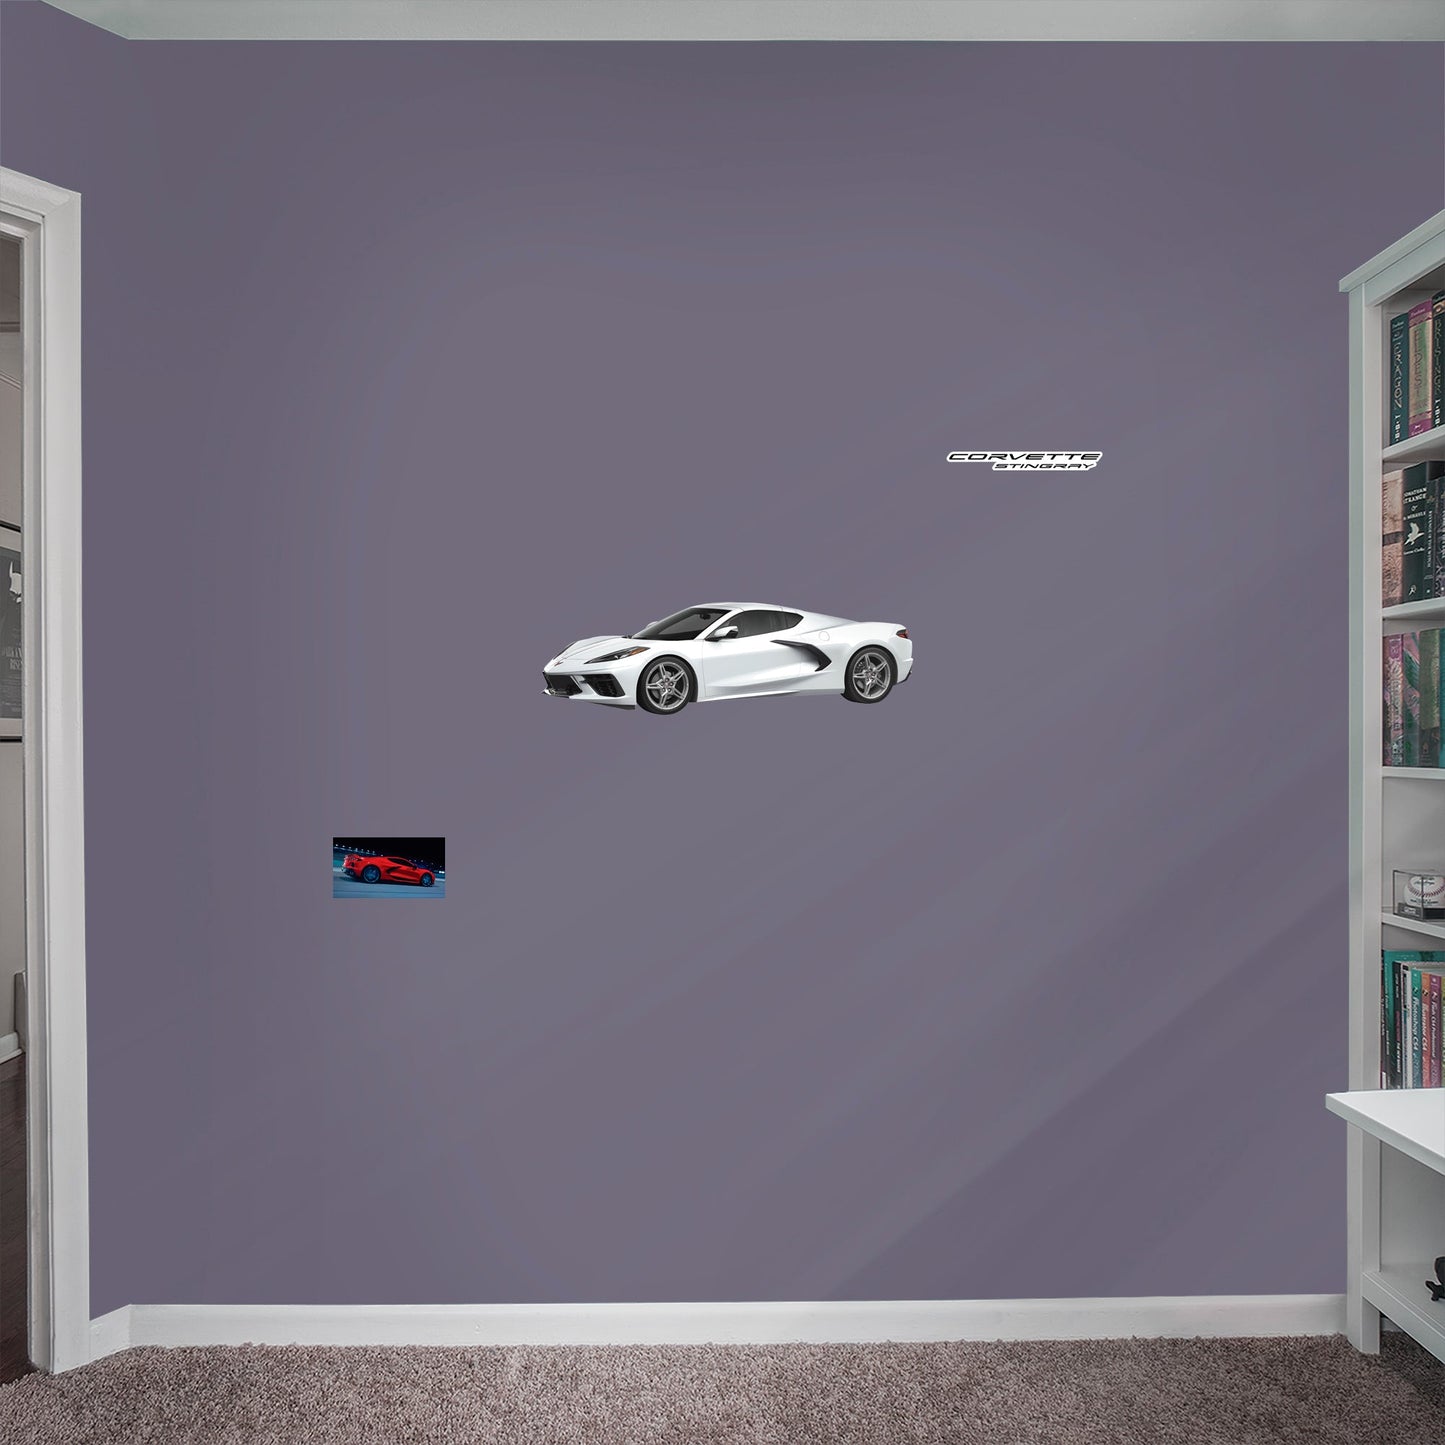 Chevrolet Corvette White Stingray: Officially Licensed GM Removable Wall Decal